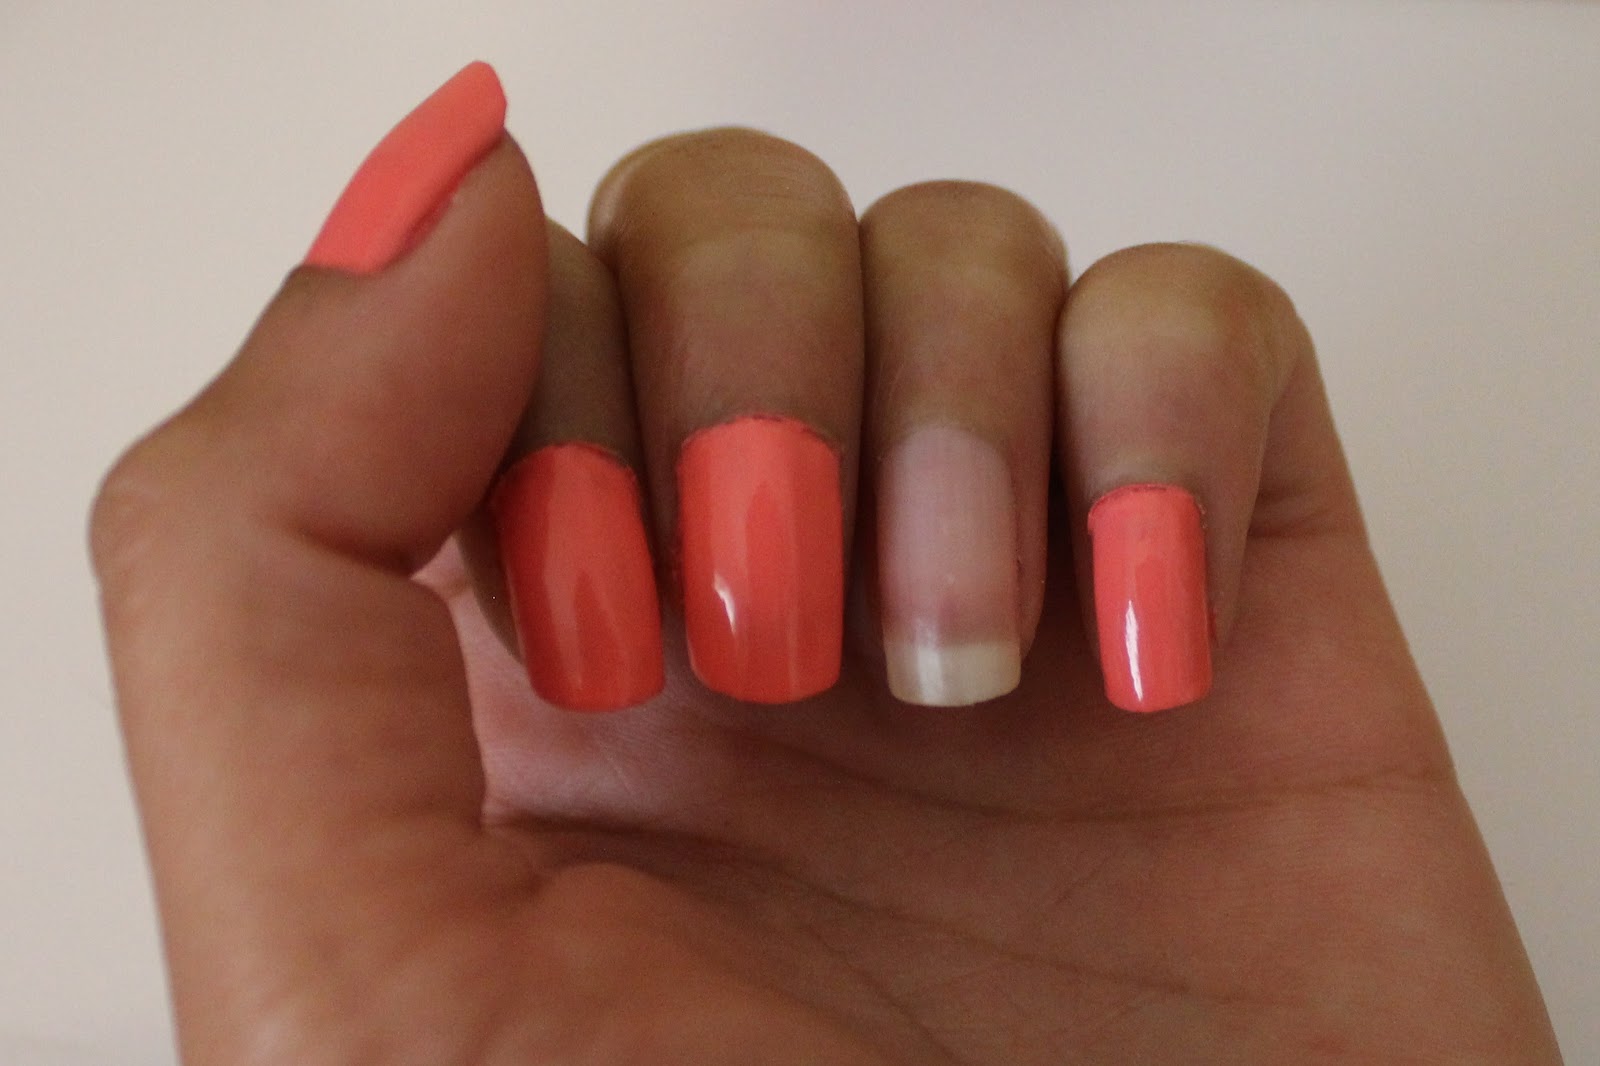 7. Butter London Nail Lacquer in "Trout Pout" - wide 2